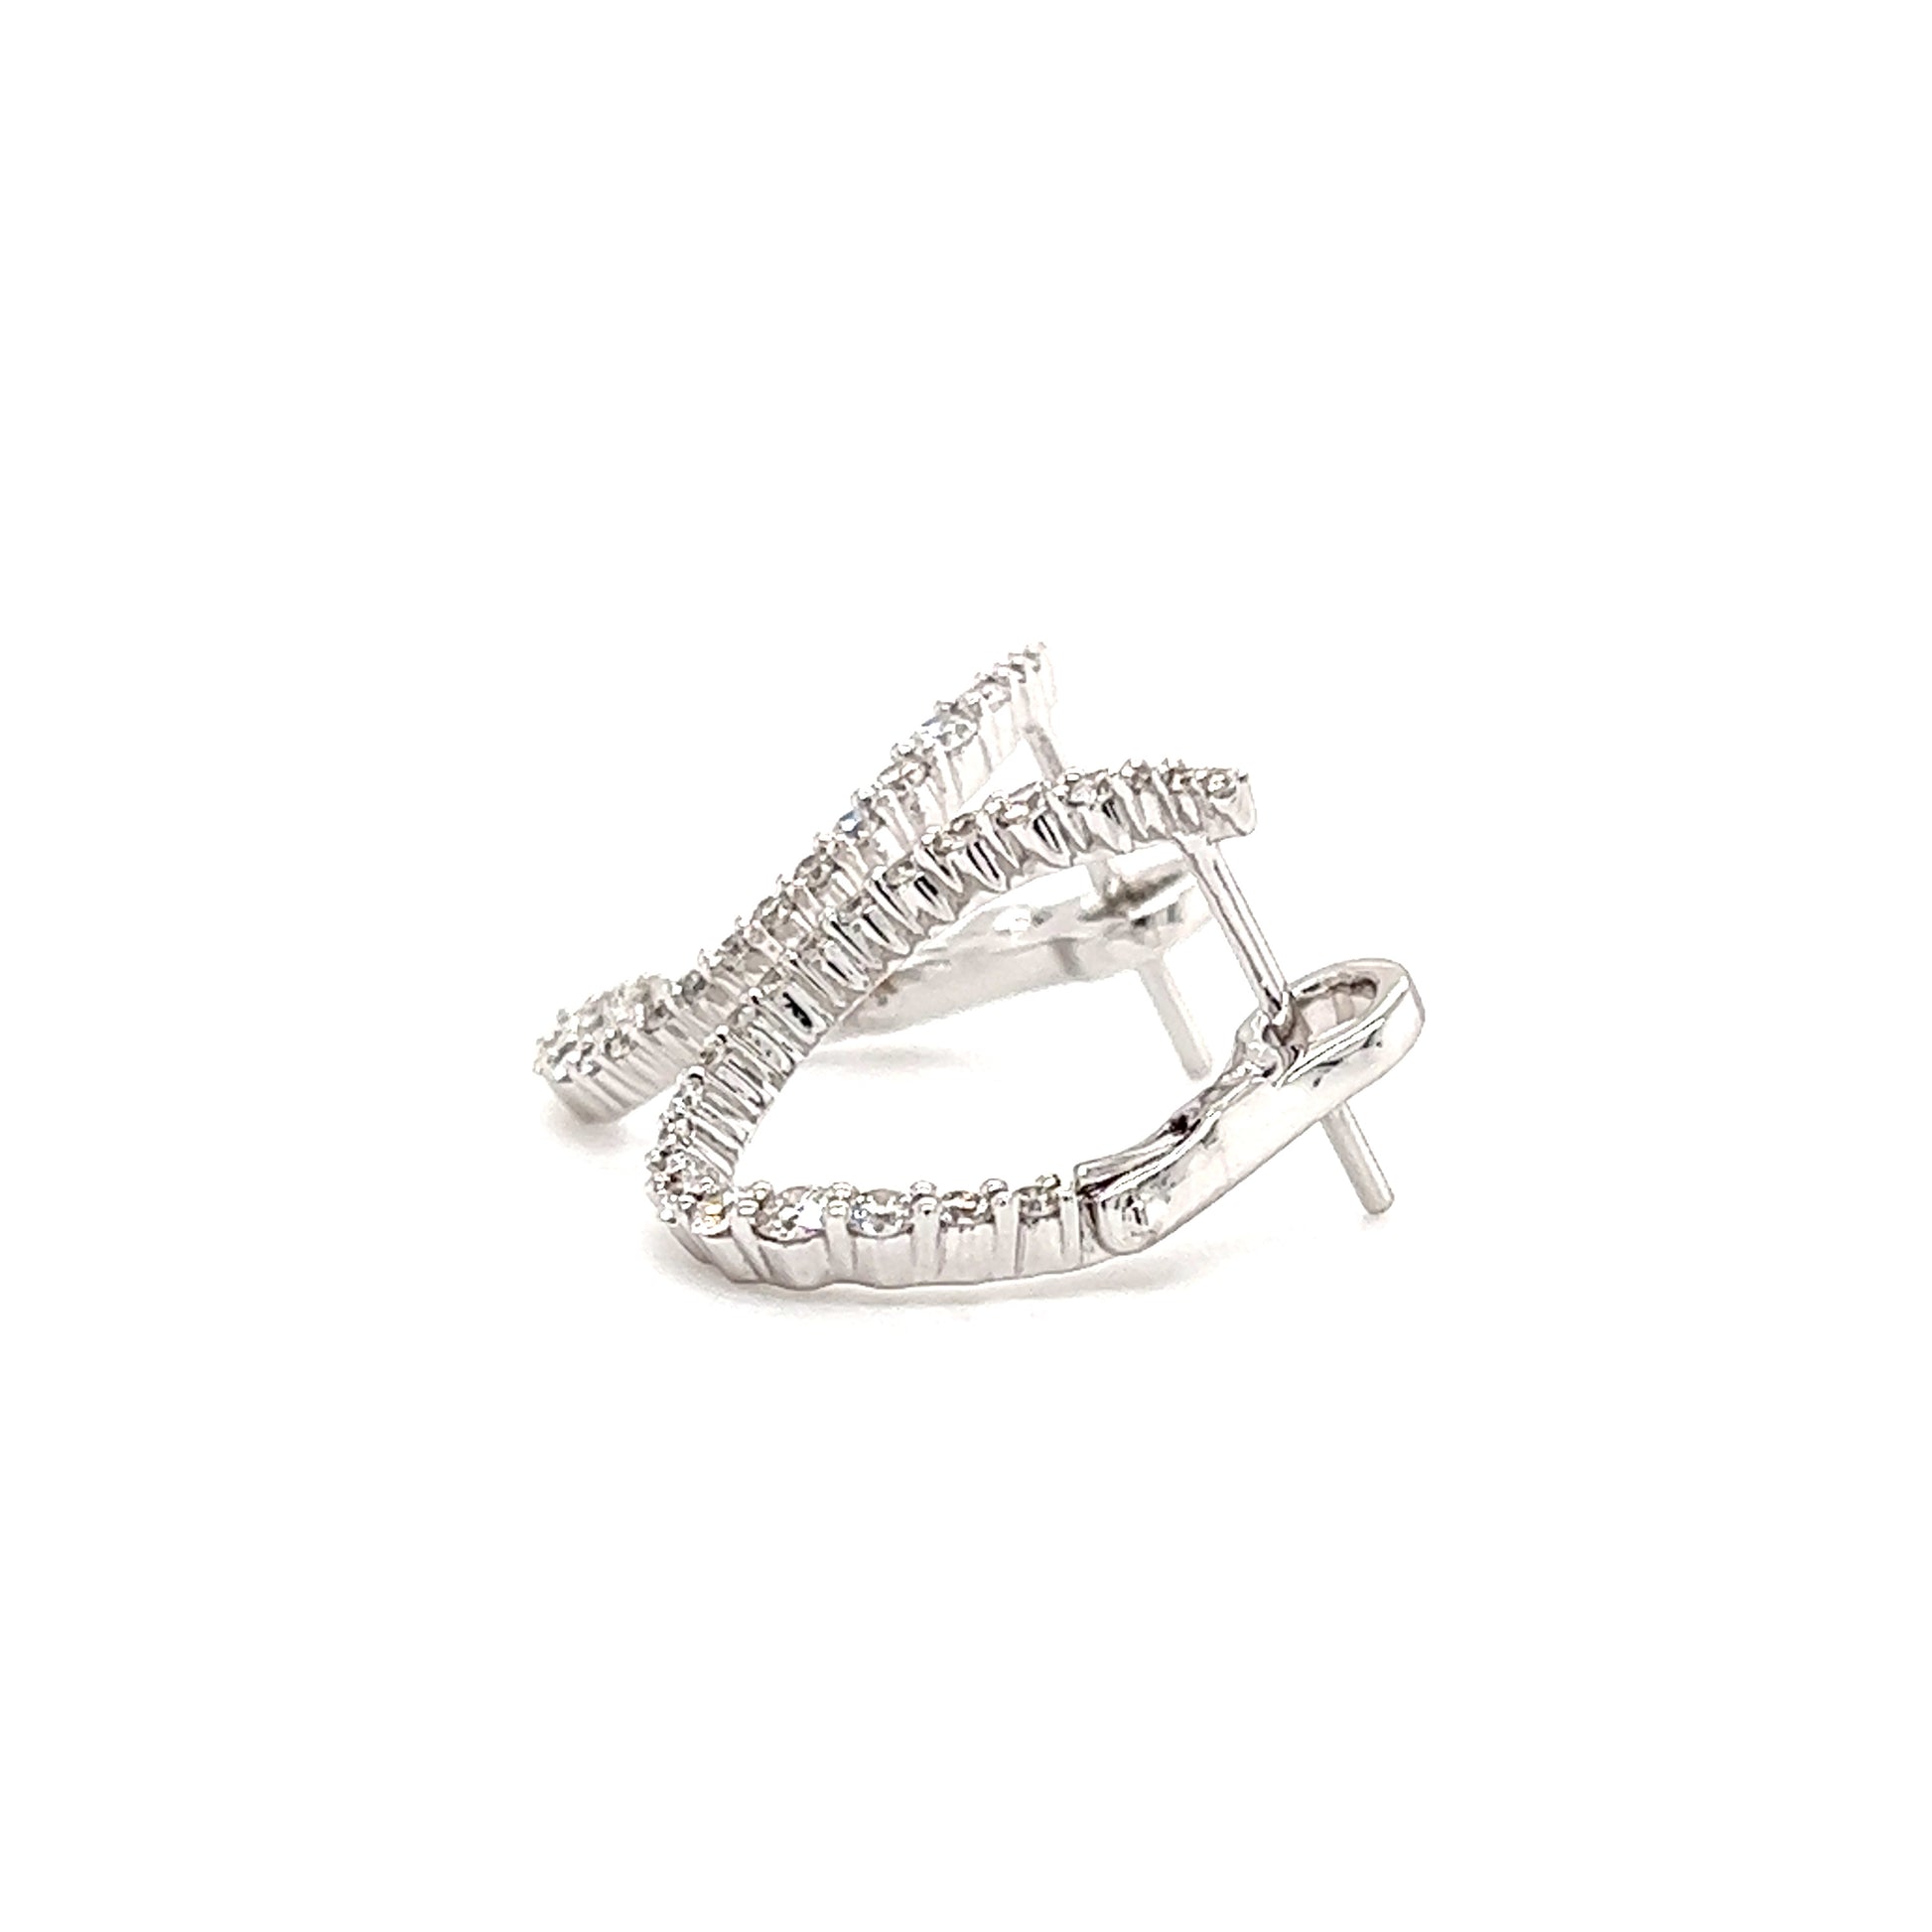 Swirled Diamond Hoop Earrings with 0.45ctw of Diamonds in 18K White Gold Right Side View